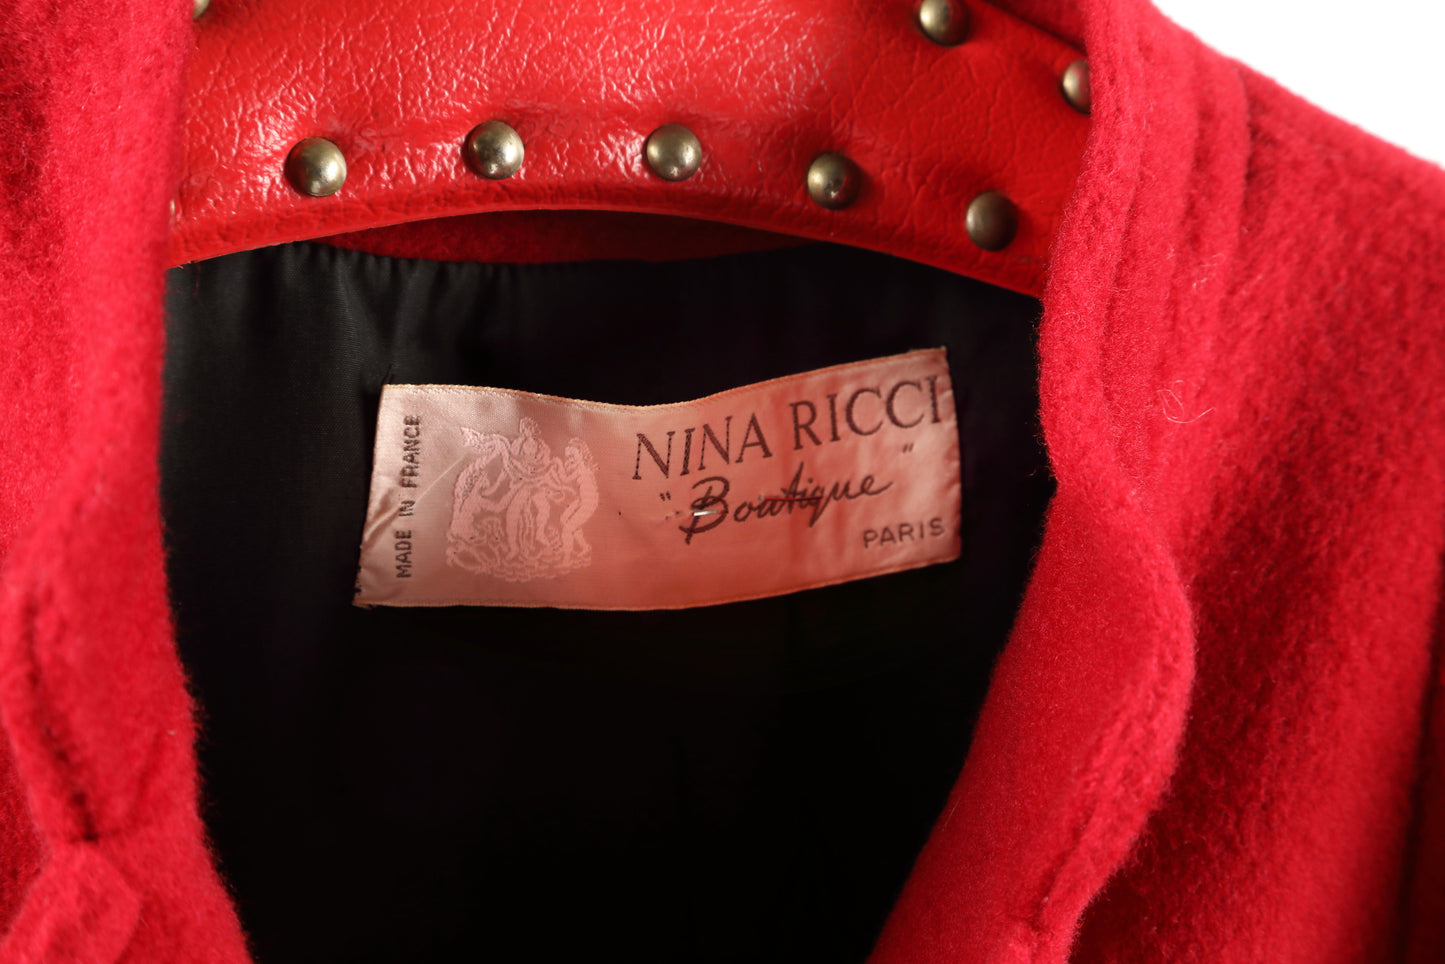 Nina Ricci Boutique jacket from the 80s